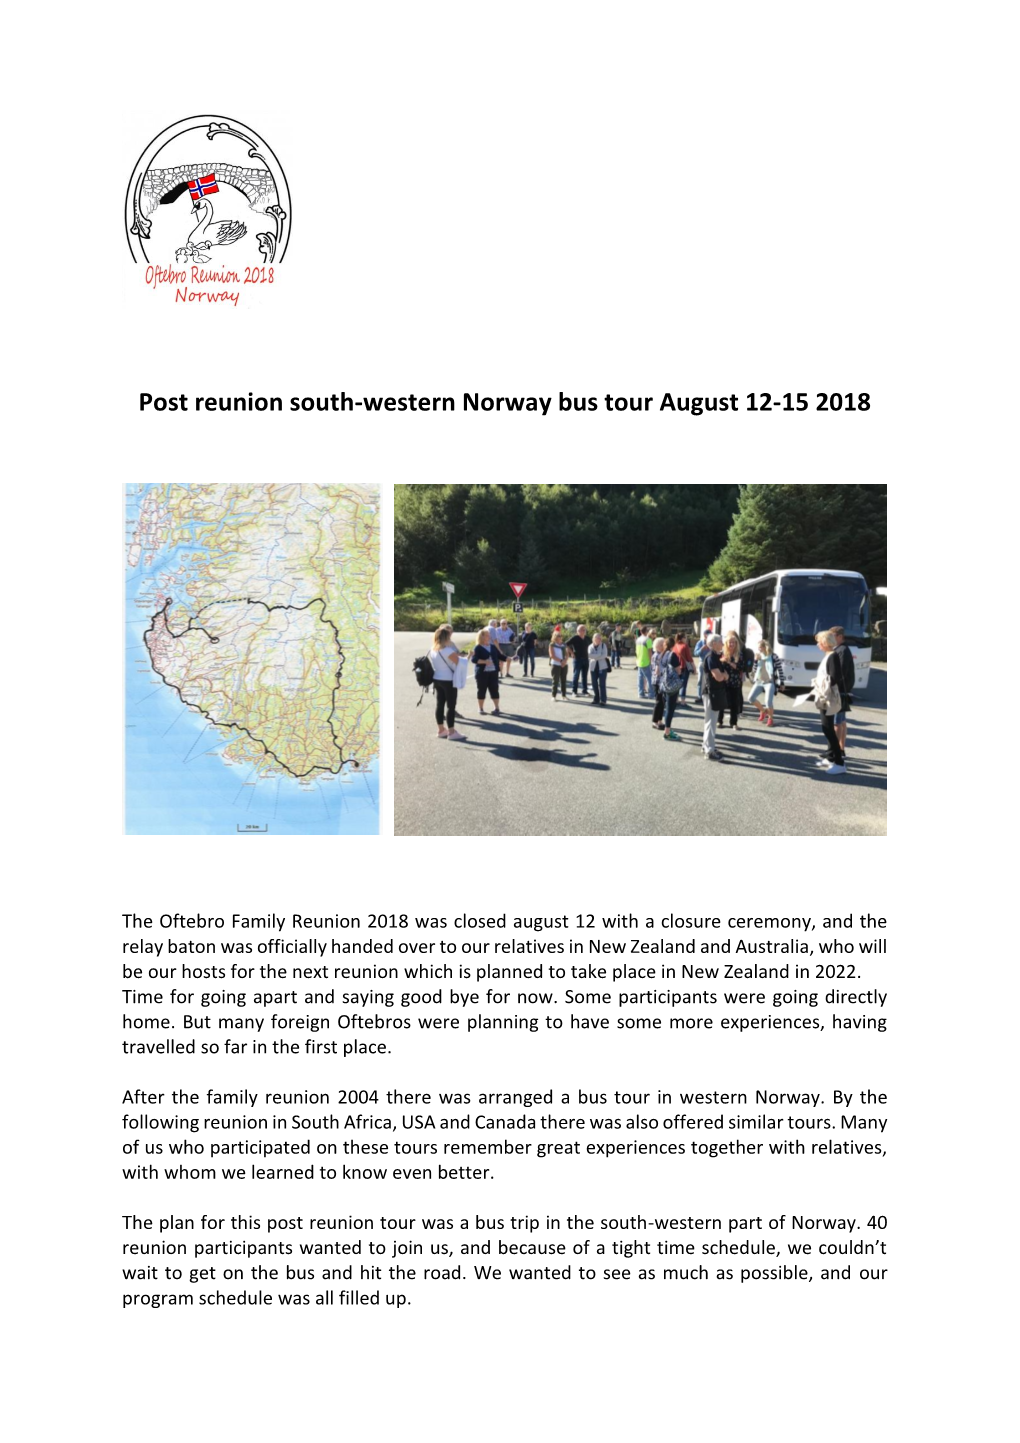 Post Reunion South-Western Norway Bus Tour August 12-15 2018